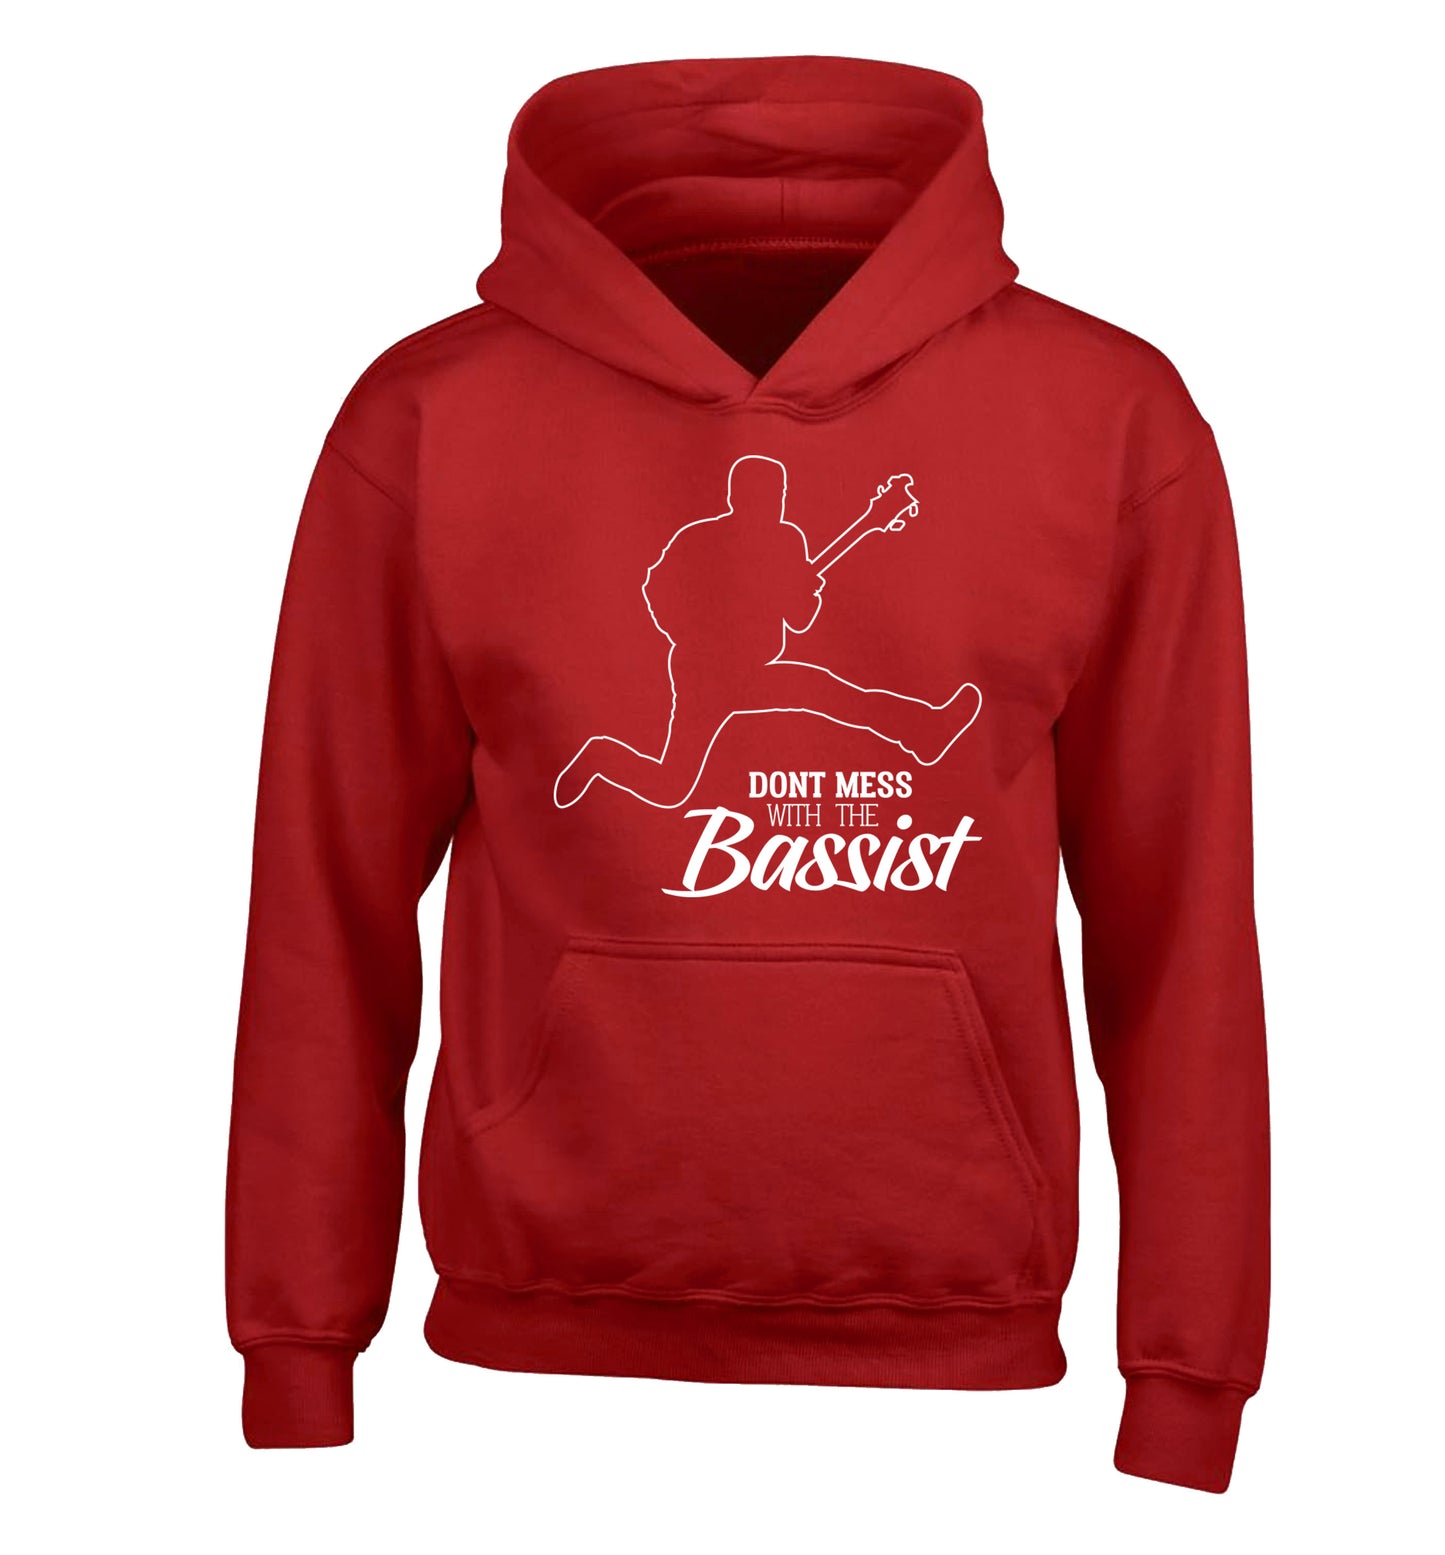 Dont mess with the bassist children's red hoodie 12-13 Years